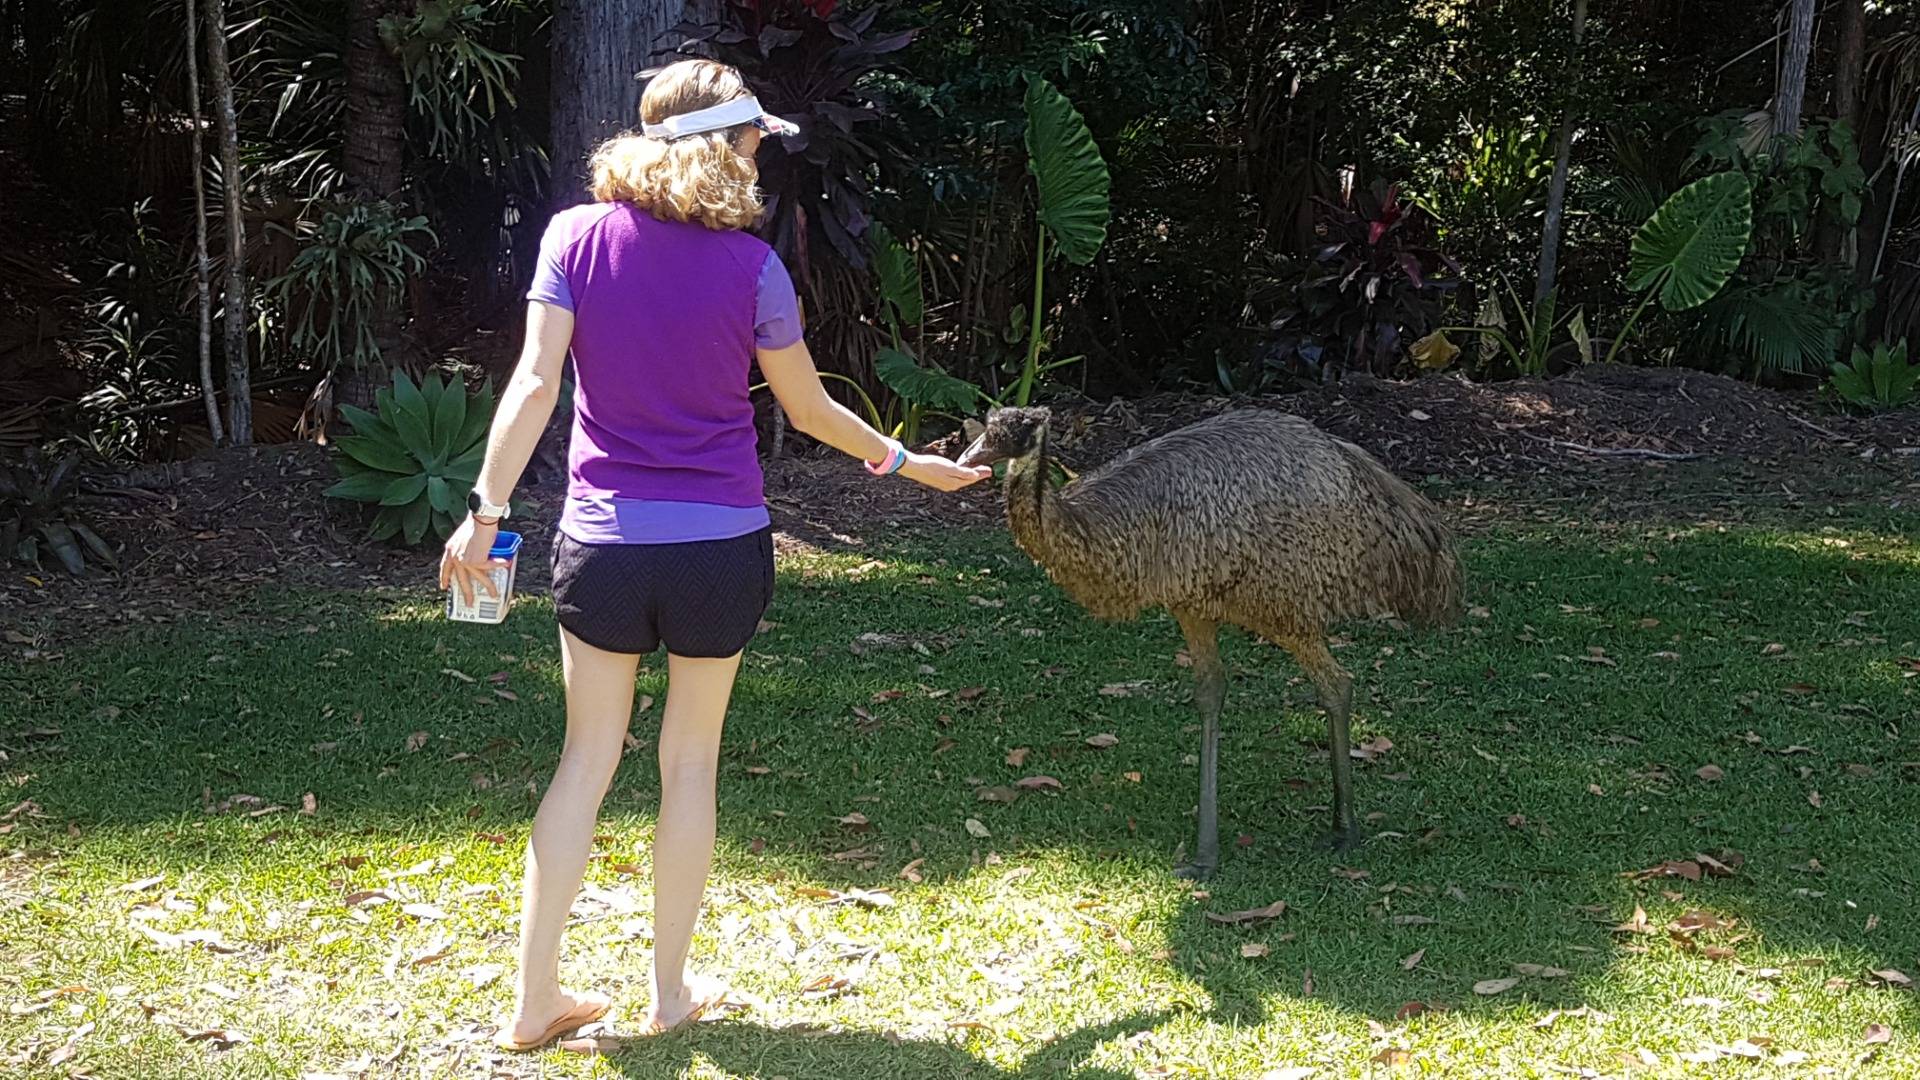 Fluffy is one of two local emus who was rescued and hand raised. So while you wouldn’t feed an emu in the wild, Fluffy is used to be fed and even patted by humans.